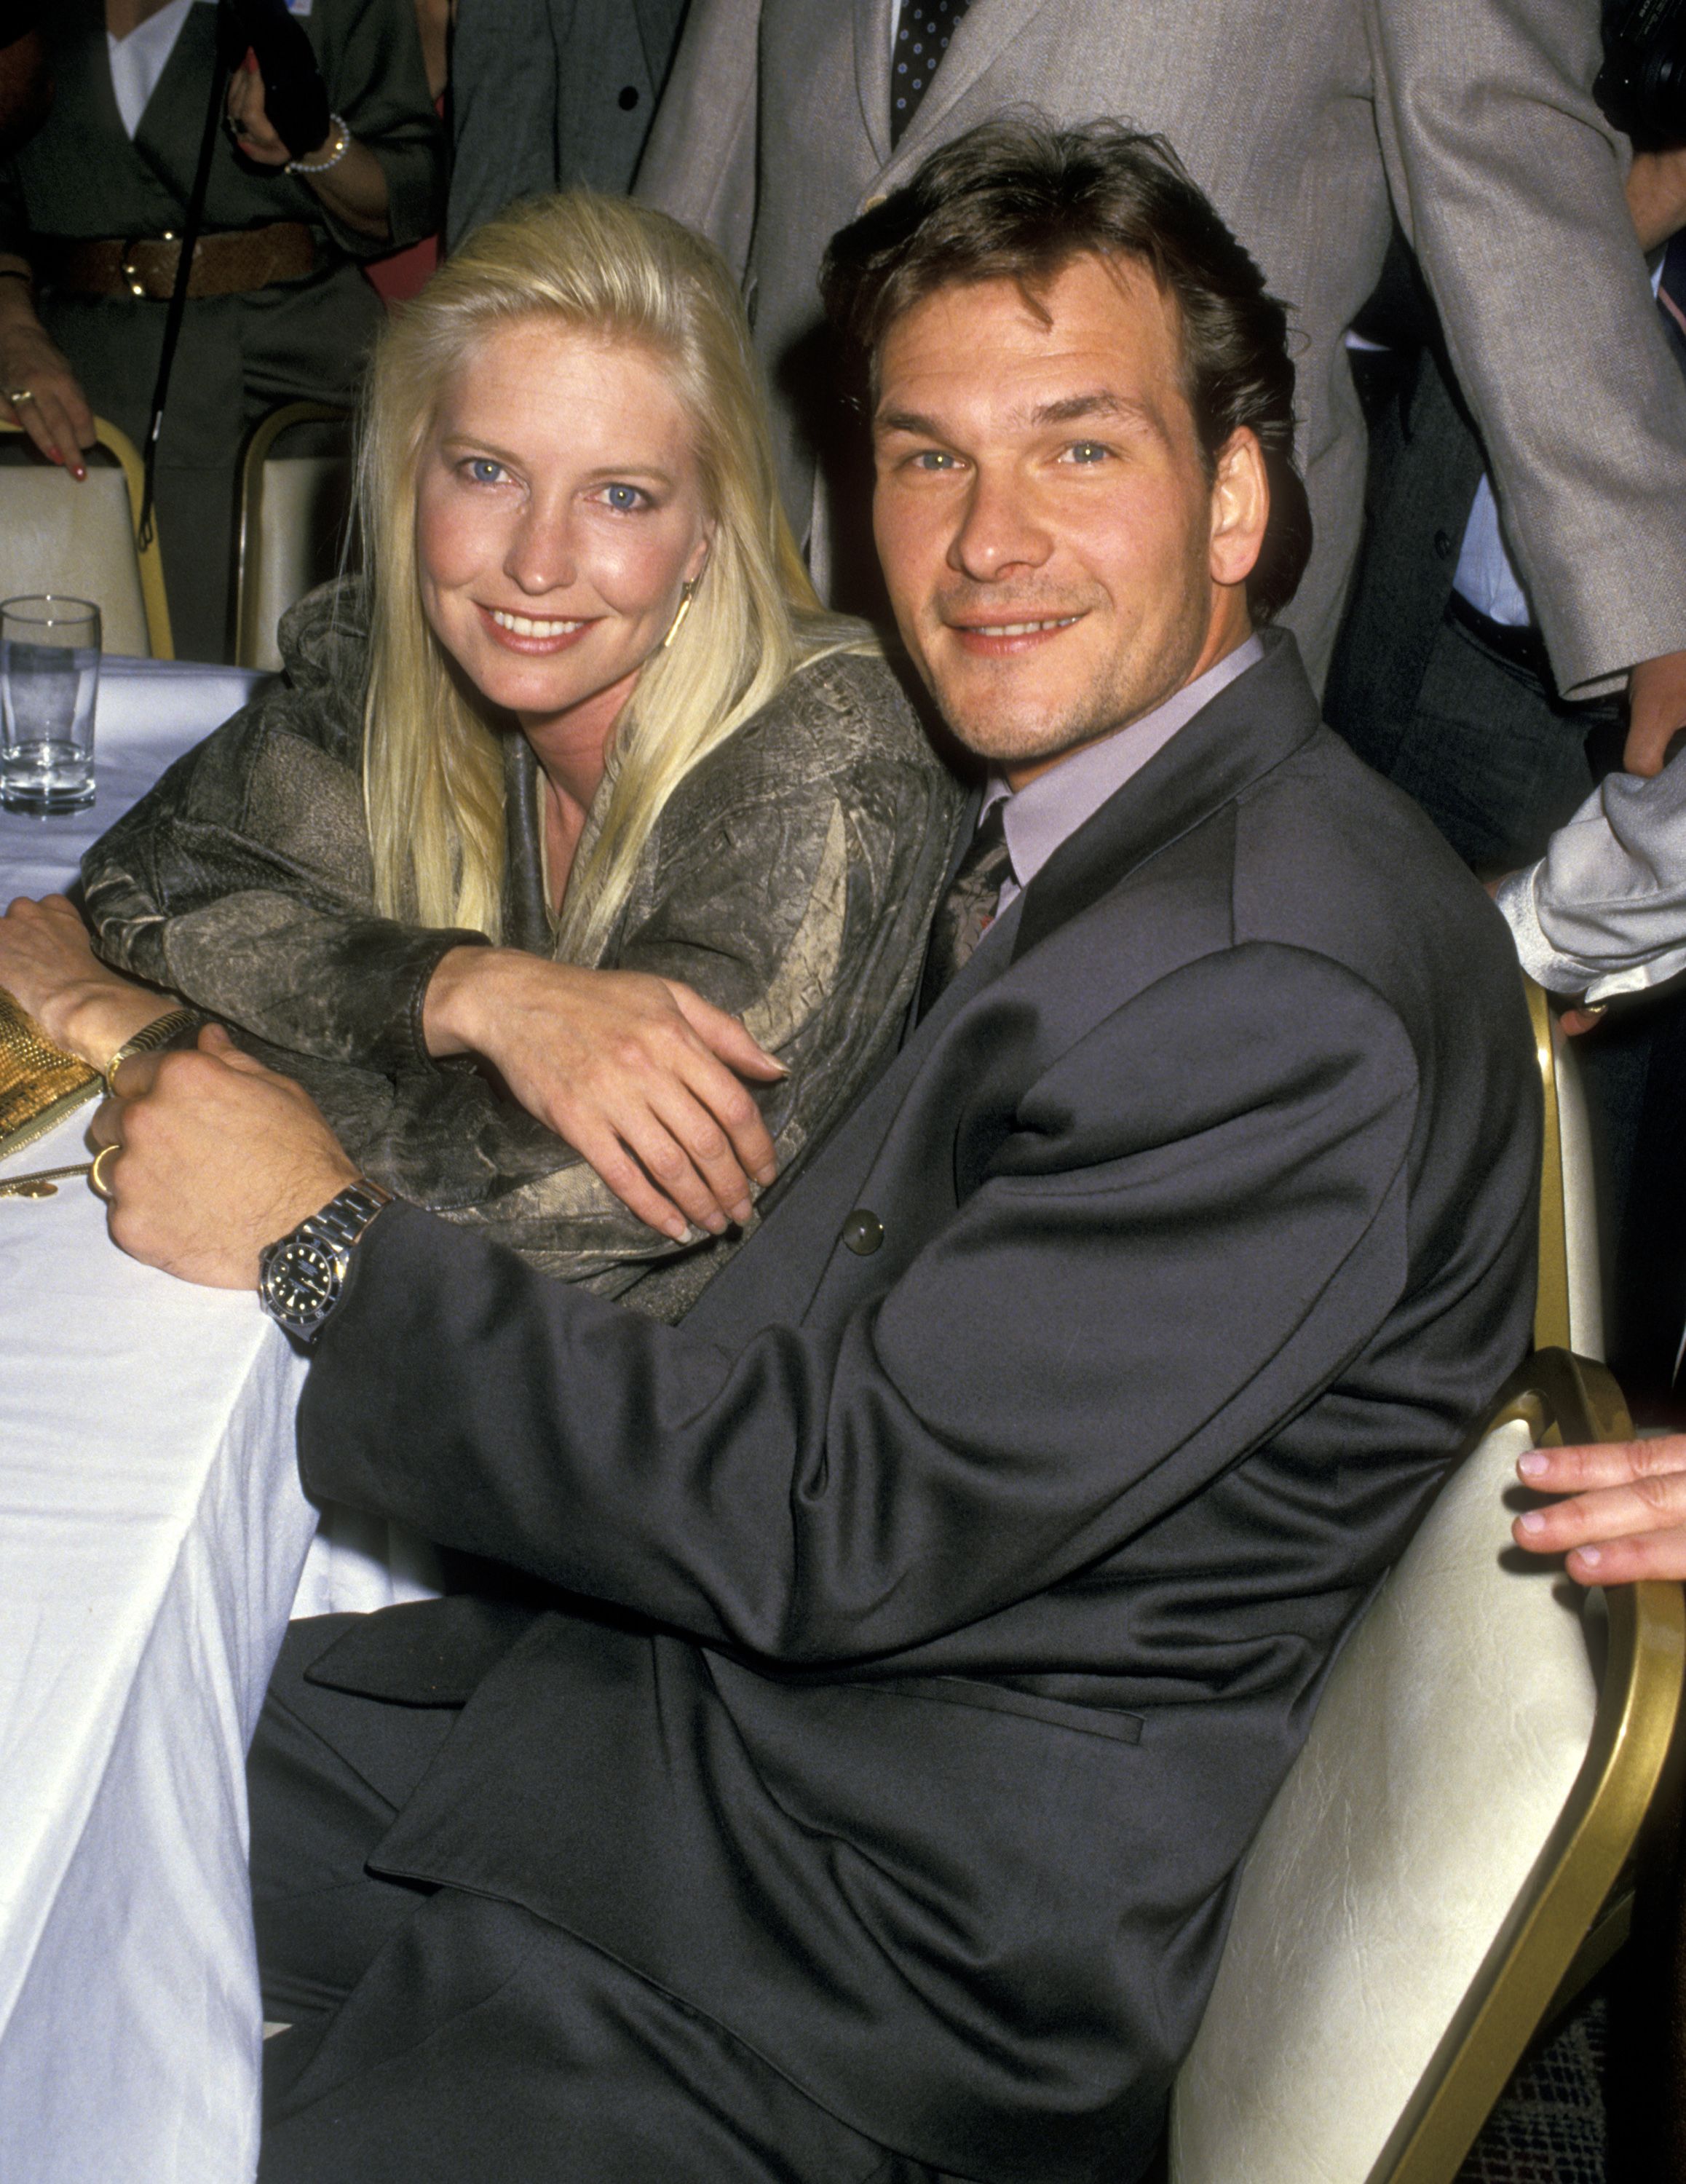 Lisa Niemi and Patrick Swayze at the NATO-ShoWest Convention on February 24, 1988, at Bally's Hotel and Casino in Las Vegas, Nevada | Photo: Ron Galella, Ltd./Ron Galella Collection/Getty Images